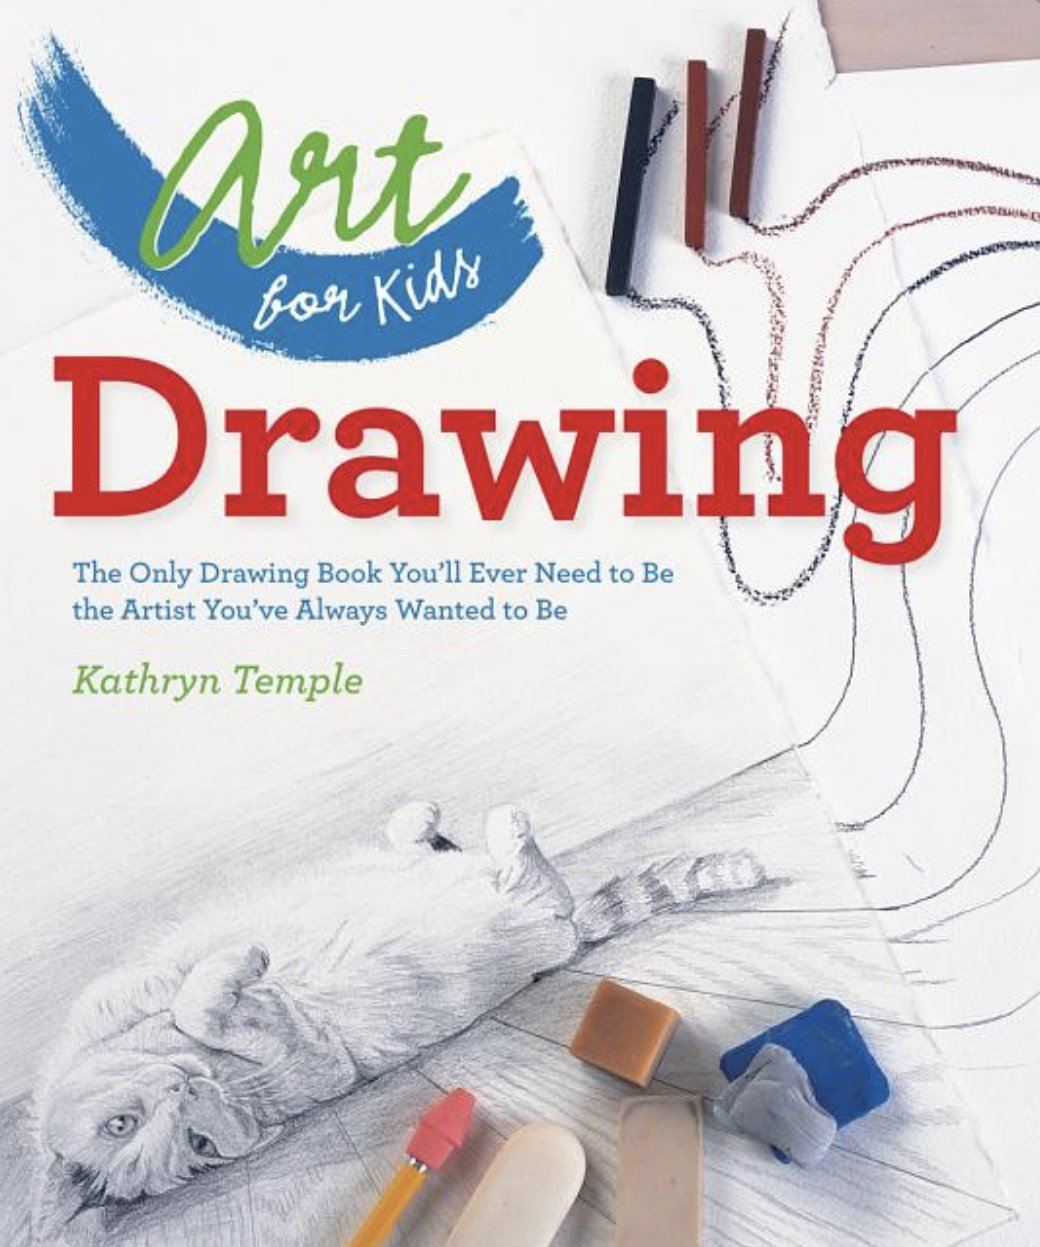 The Art of Drawing, a book for all ages